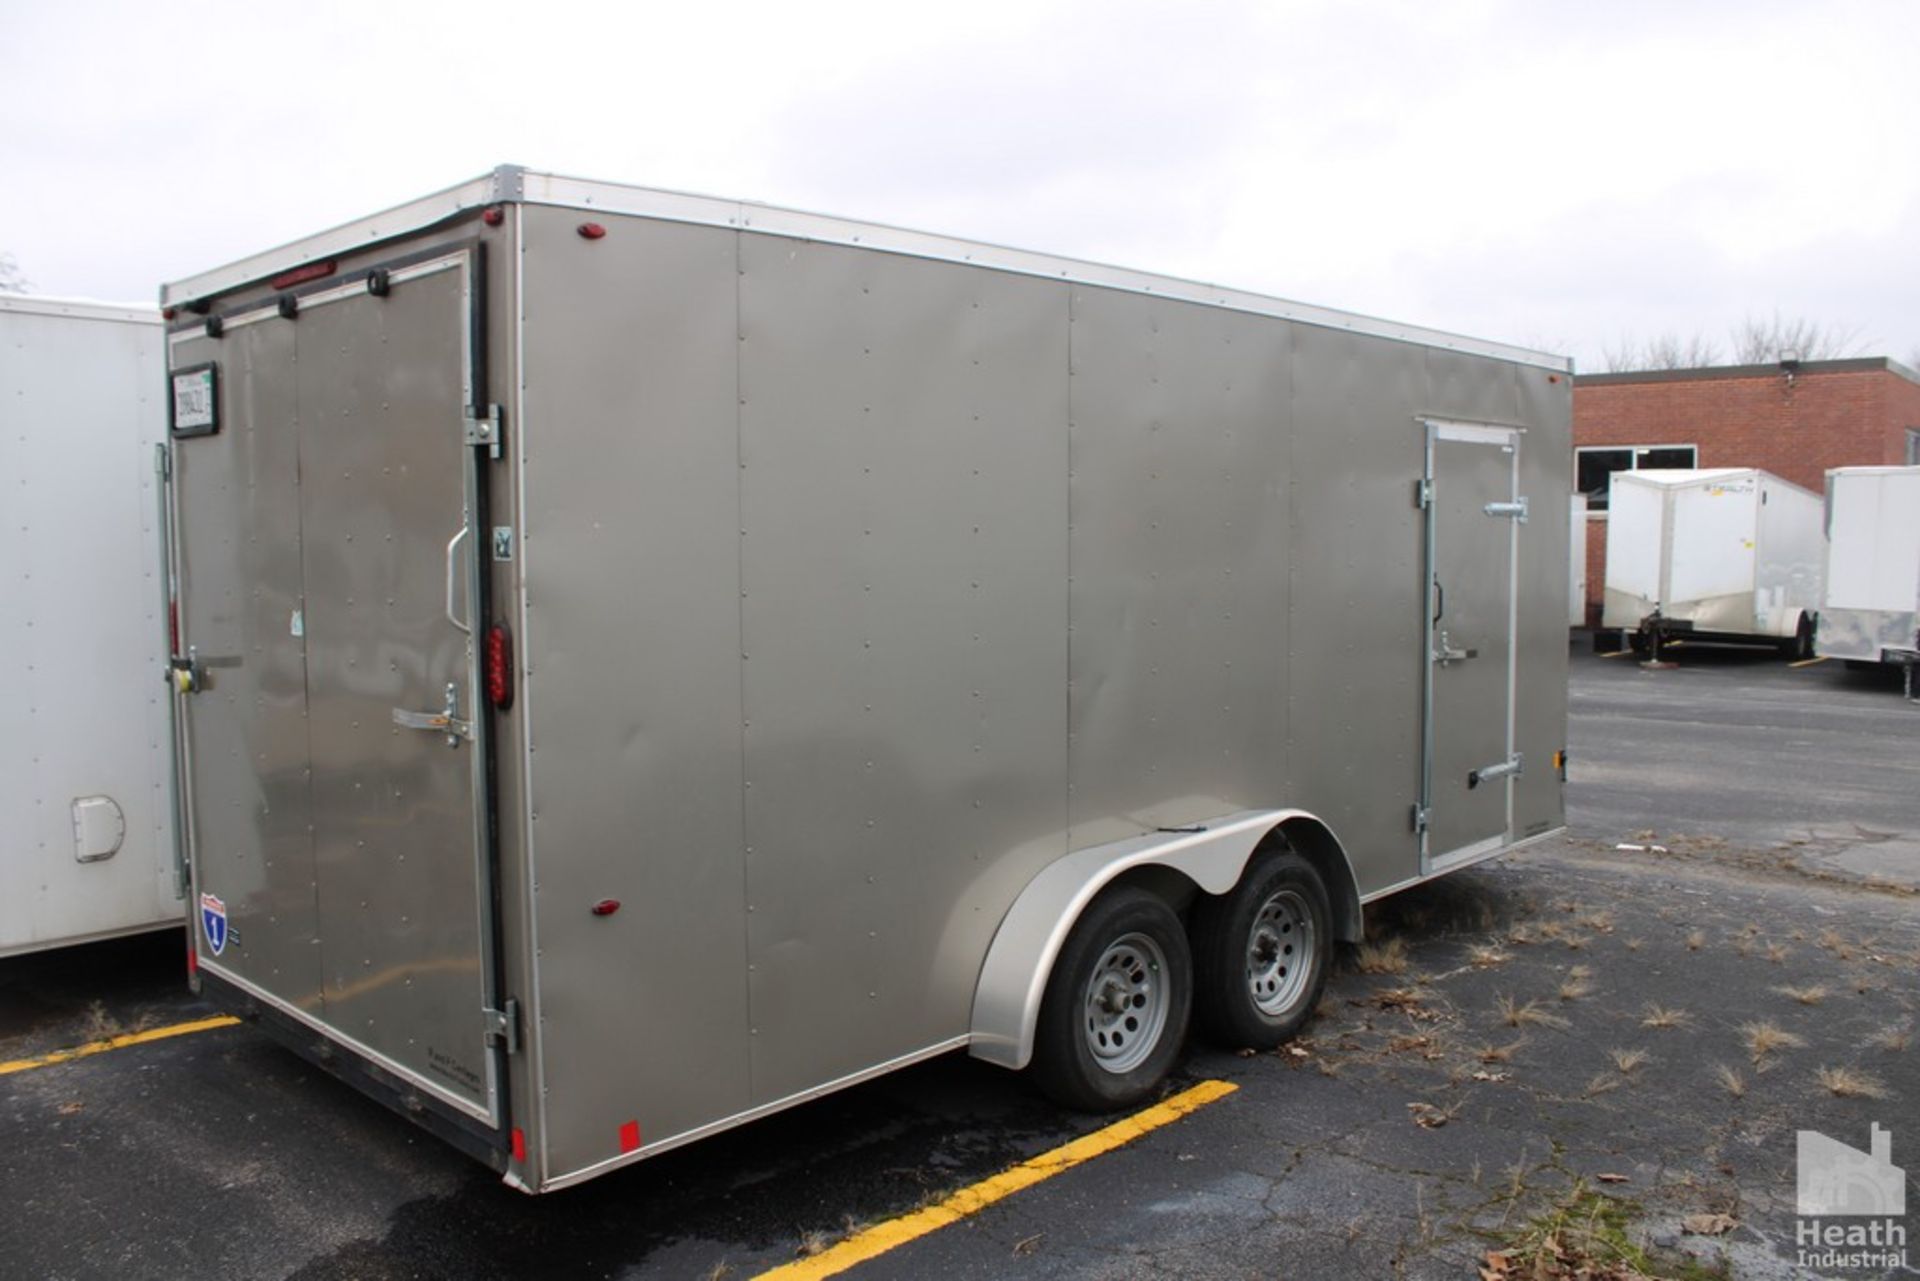 INTERSTATE MANUFACTURING 20’ ENCLOSED TRAILER, VIN: 1UK500H23N1105785 (NEW 2022), WITH SIDE DOOR, - Image 3 of 4